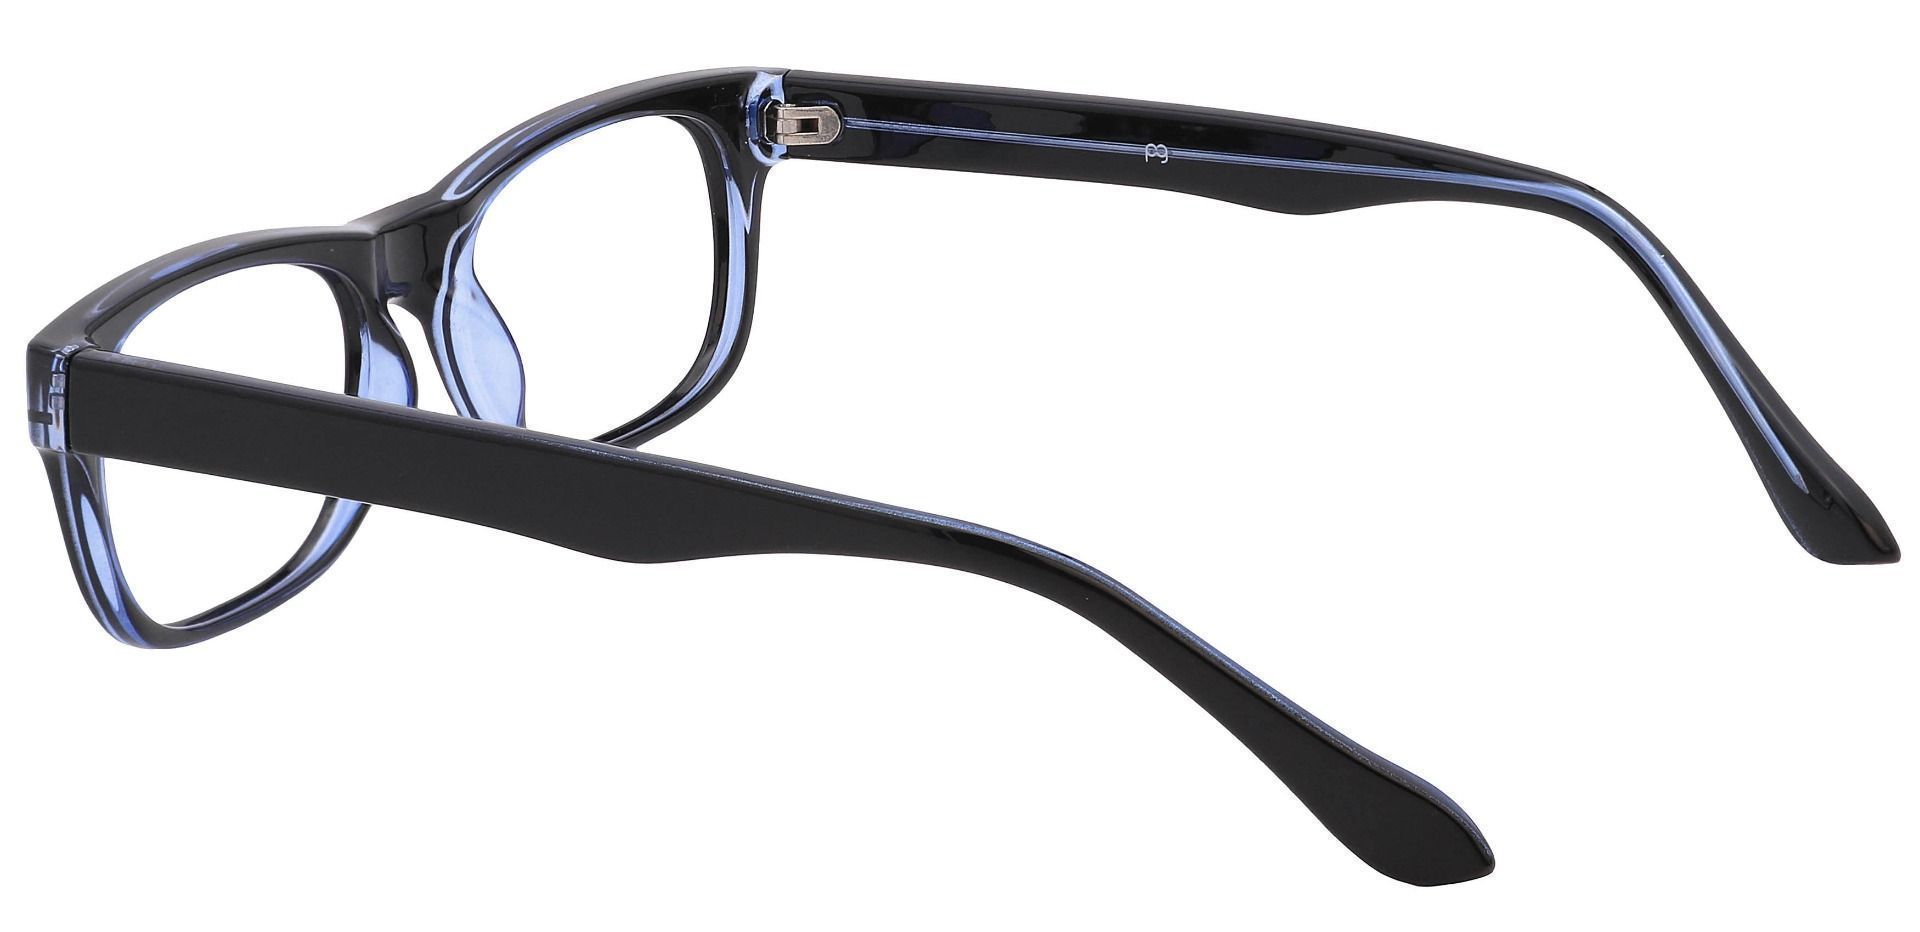 Murphy Rectangle Lined Bifocal Glasses - The Frame Is Blue And Black